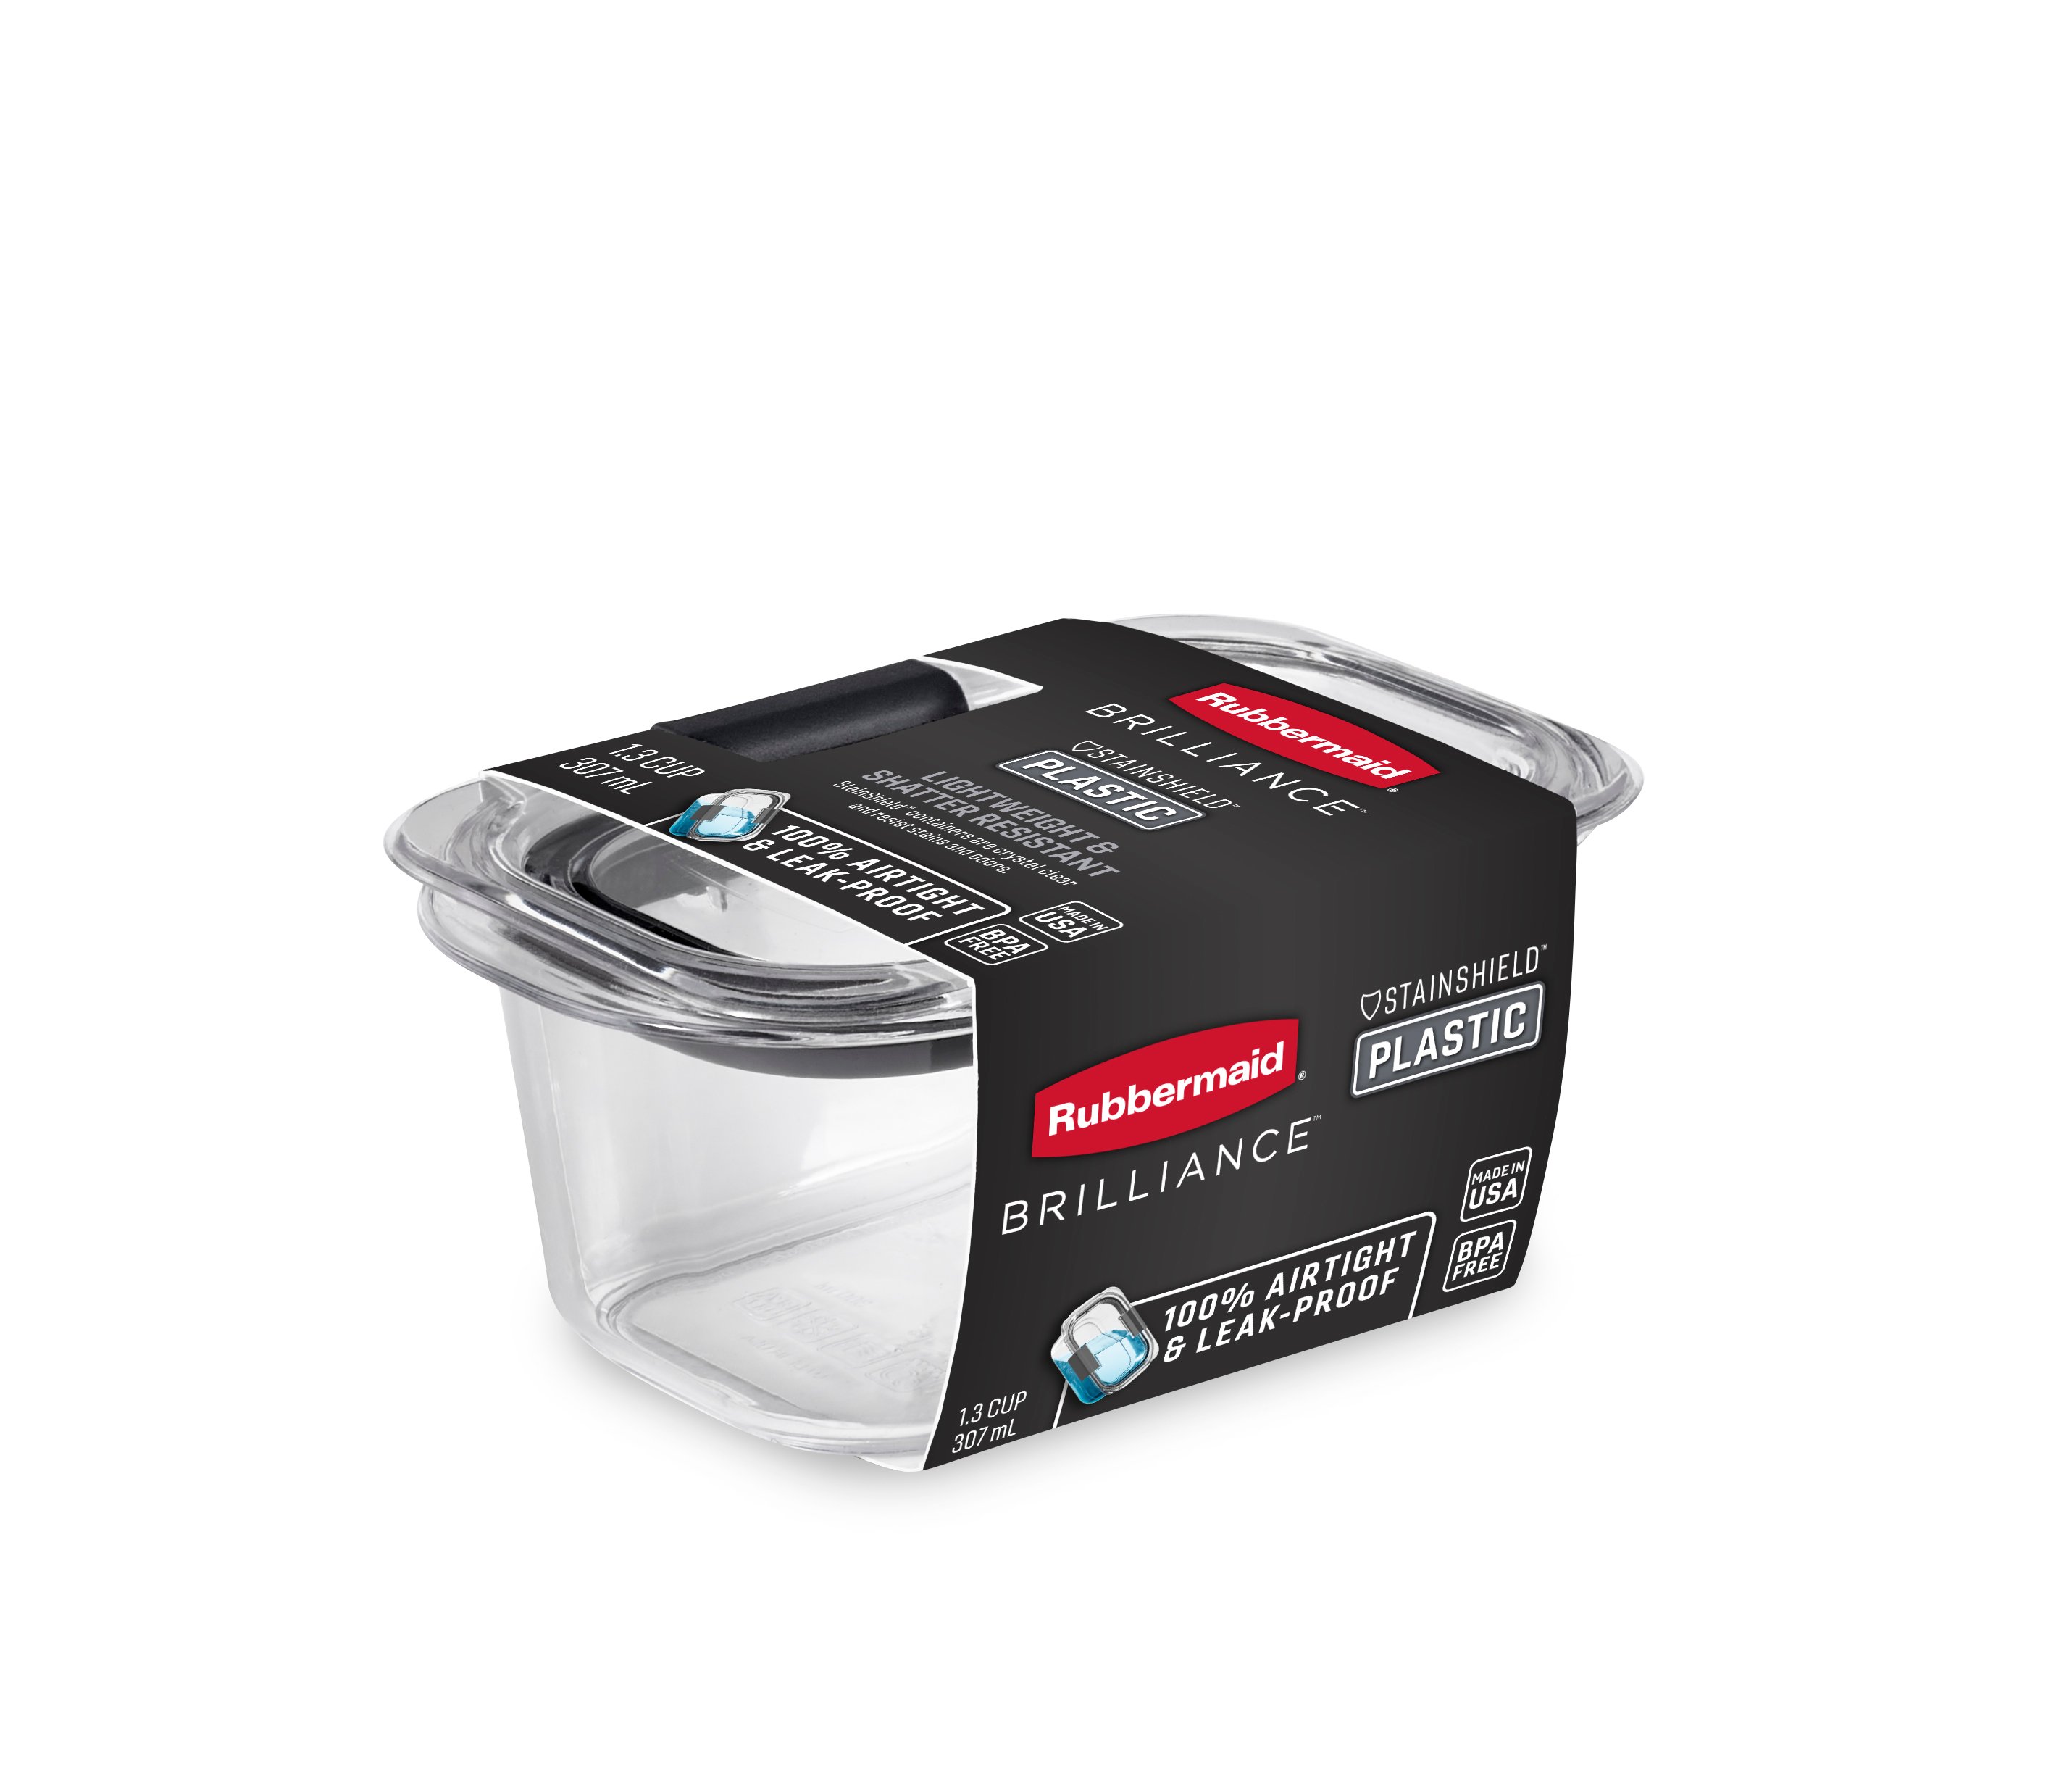 https://s7d9.scene7.com/is/image/NewellRubbermaid/2024345-rubbermaid-food-storage-brilliance-tritan-clear-1.3c-in-pack-high-angle